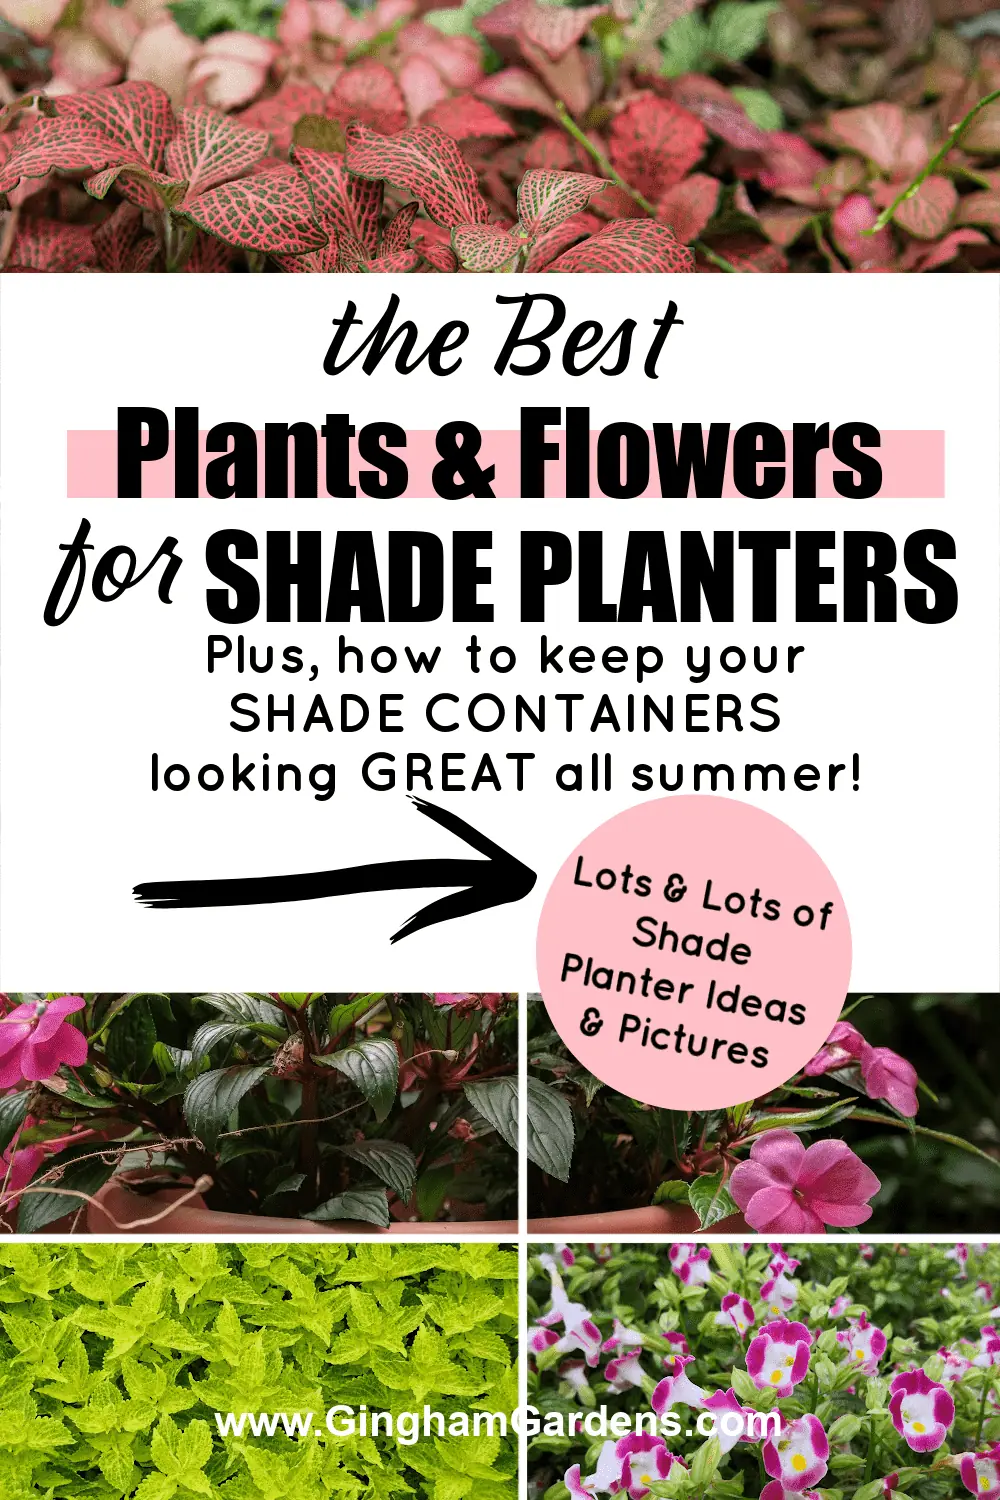 Collage of images featuring shade plants and flowers with text overlay - the Best Plants & Flowers for Shade Planters